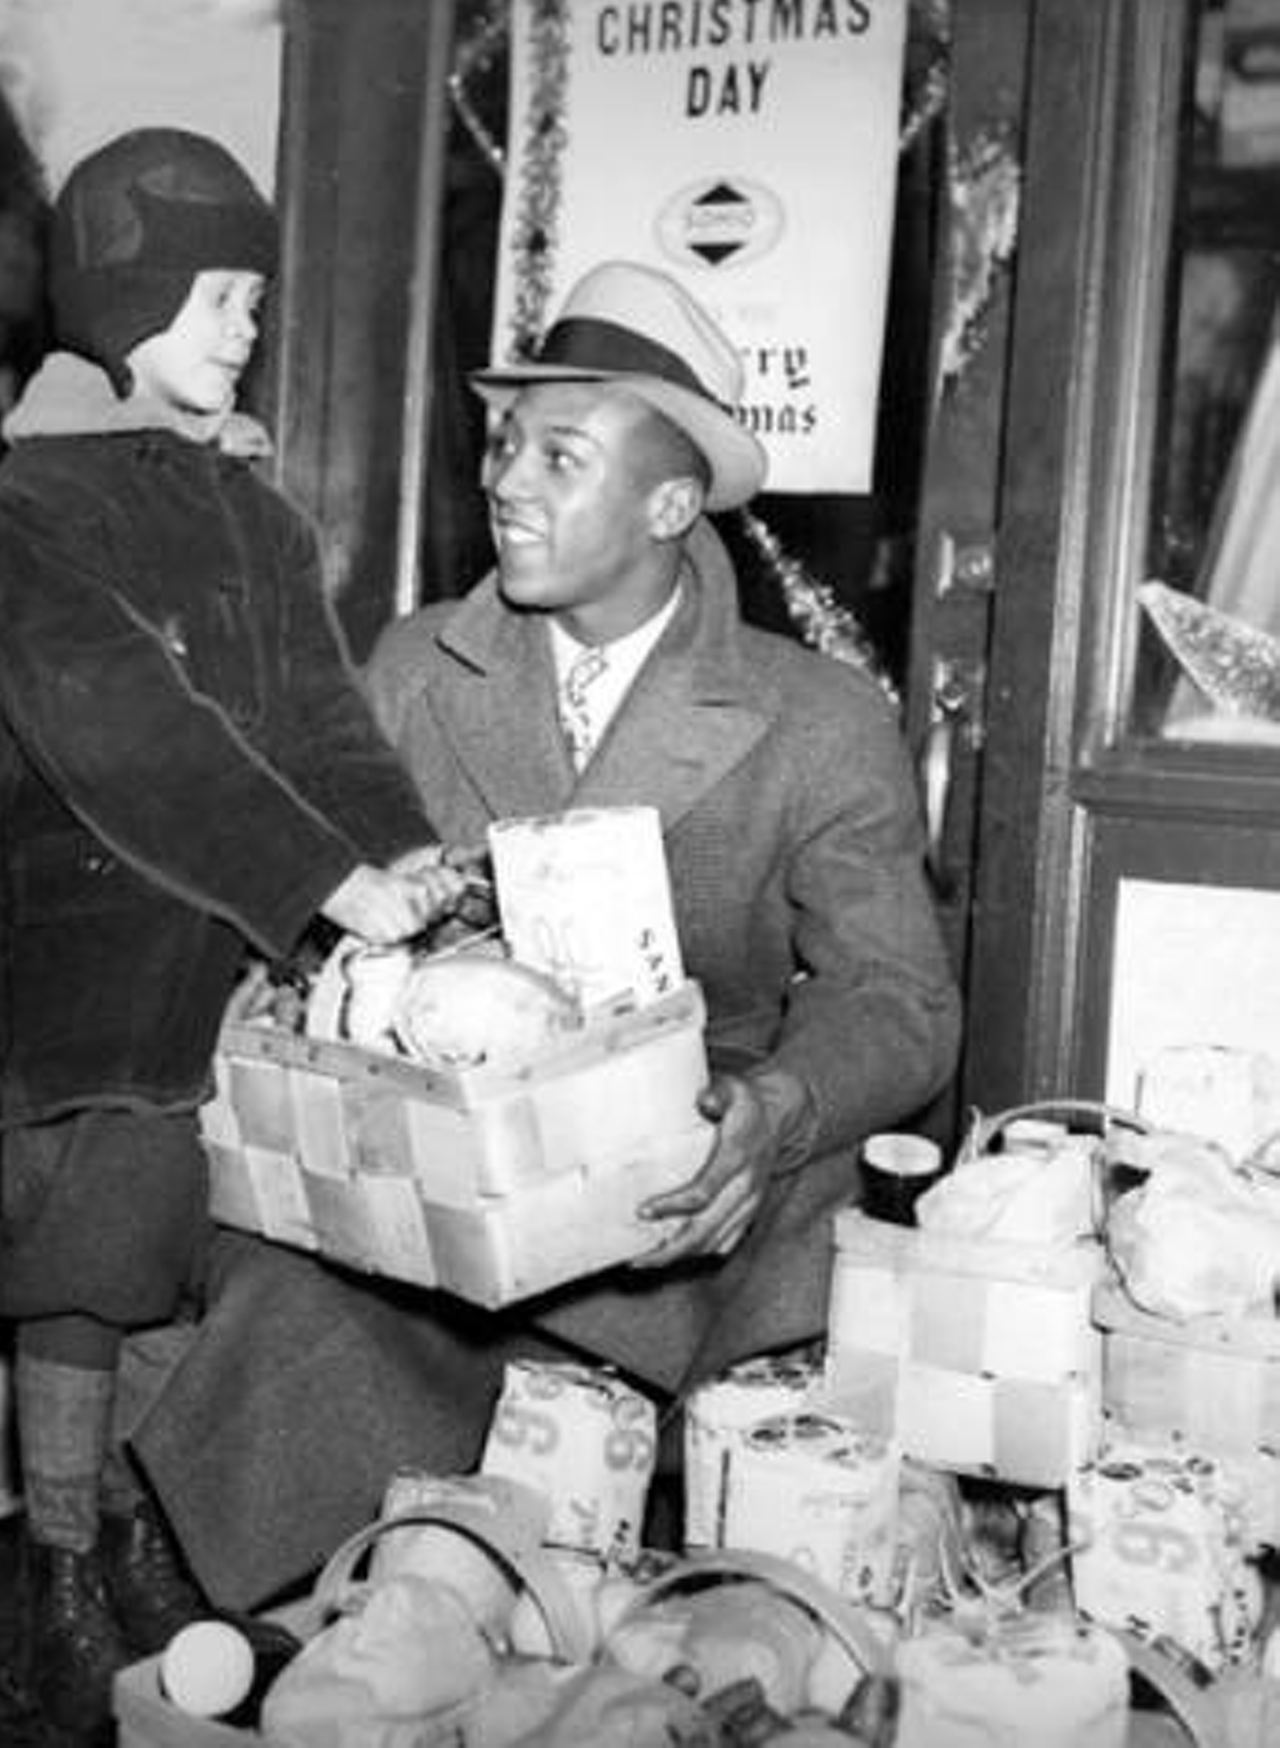 1935: Jesse Owens brings Christmas gift baskets to needy families.